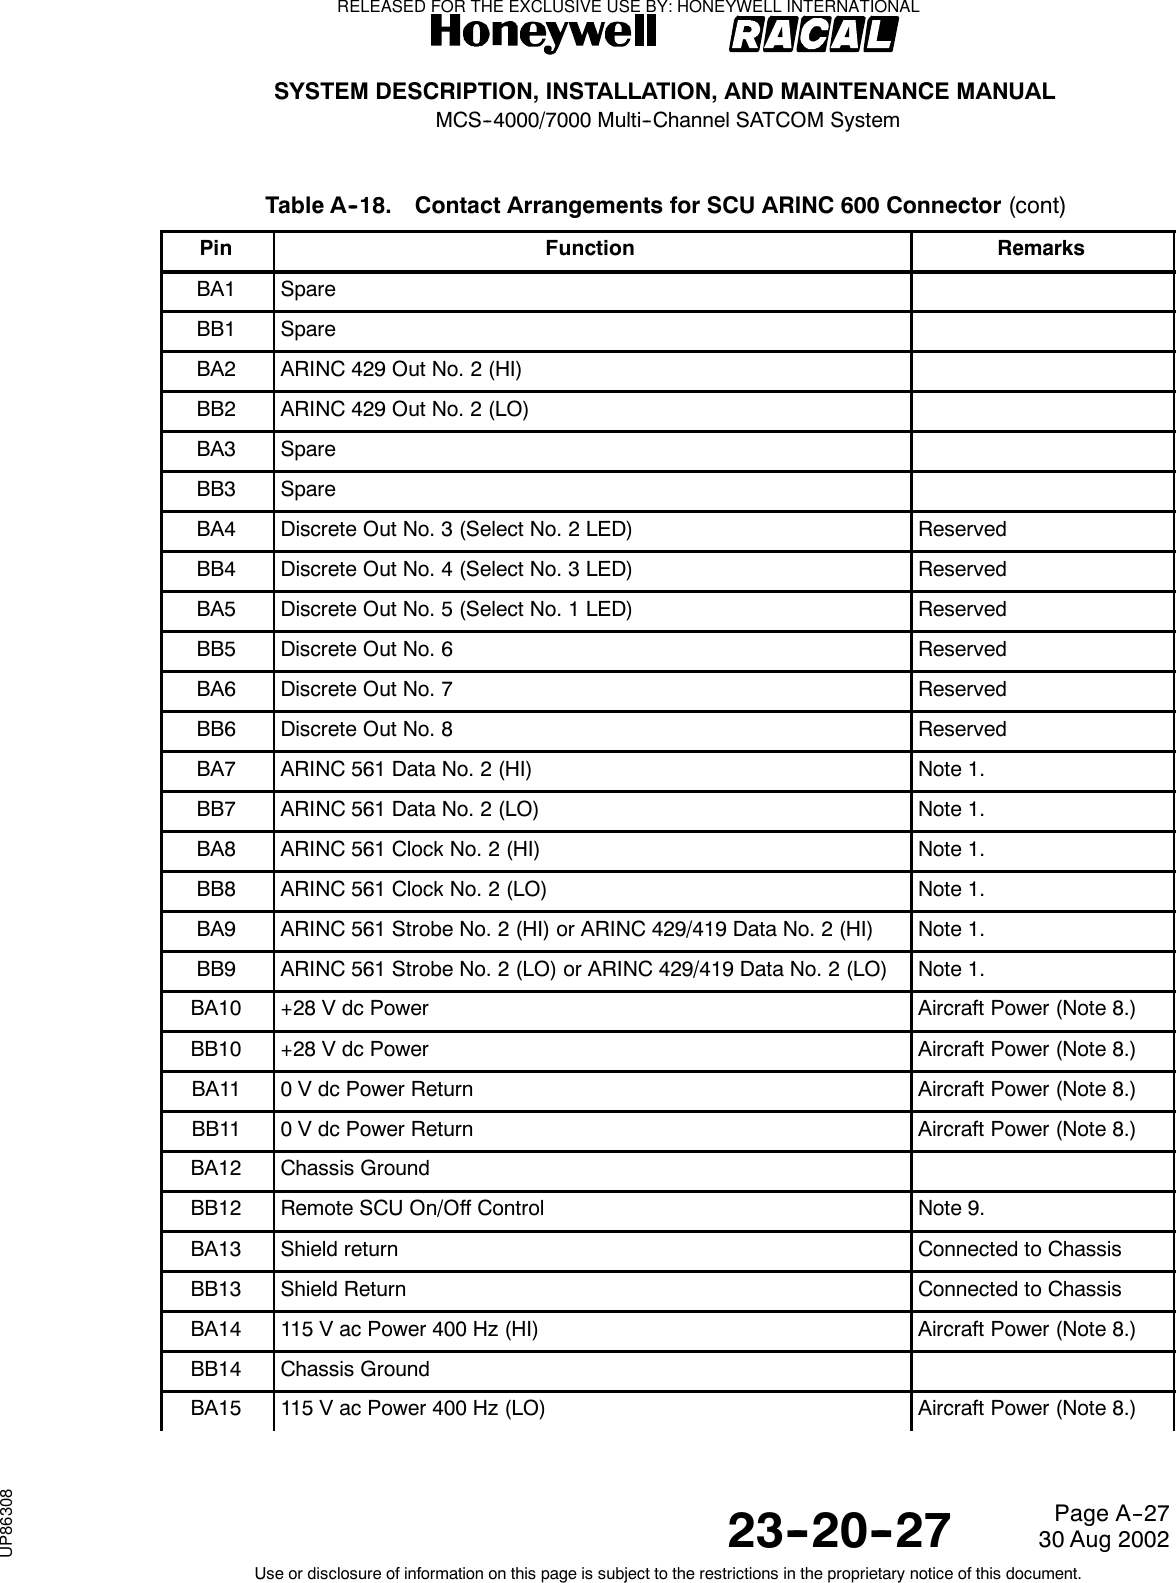 SYSTEM DESCRIPTION, INSTALLATION, AND MAINTENANCE MANUALMCS--4000/7000 Multi--Channel SATCOM System23--20--2730 Aug 2002Use or disclosure of information on this page is subject to the restrictions in the proprietary notice of this document.Page A--27Table A--18. Contact Arrangements for SCU ARINC 600 Connector (cont)Pin RemarksFunctionBA1 SpareBB1 SpareBA2 ARINC 429 Out No. 2 (HI)BB2 ARINC 429 Out No. 2 (LO)BA3 SpareBB3 SpareBA4 Discrete Out No. 3 (Select No. 2 LED) ReservedBB4 Discrete Out No. 4 (Select No. 3 LED) ReservedBA5 Discrete Out No. 5 (Select No. 1 LED) ReservedBB5 Discrete Out No. 6 ReservedBA6 Discrete Out No. 7 ReservedBB6 Discrete Out No. 8 ReservedBA7 ARINC 561 Data No. 2 (HI) Note 1.BB7 ARINC 561 Data No. 2 (LO) Note 1.BA8 ARINC 561 Clock No. 2 (HI) Note 1.BB8 ARINC 561 Clock No. 2 (LO) Note 1.BA9 ARINC 561 Strobe No. 2 (HI) or ARINC 429/419 Data No. 2 (HI) Note 1.BB9 ARINC 561 Strobe No. 2 (LO) or ARINC 429/419 Data No. 2 (LO) Note 1.BA10 +28 V dc Power Aircraft Power (Note 8.)BB10 +28 V dc Power Aircraft Power (Note 8.)BA11 0 V dc Power Return Aircraft Power (Note 8.)BB11 0 V dc Power Return Aircraft Power (Note 8.)BA12 Chassis GroundBB12 Remote SCU On/Off Control Note 9.BA13 Shield return Connected to ChassisBB13 Shield Return Connected to ChassisBA14 115 V ac Power 400 Hz (HI) Aircraft Power (Note 8.)BB14 Chassis GroundBA15 115 V ac Power 400 Hz (LO) Aircraft Power (Note 8.)RELEASED FOR THE EXCLUSIVE USE BY: HONEYWELL INTERNATIONALUP86308